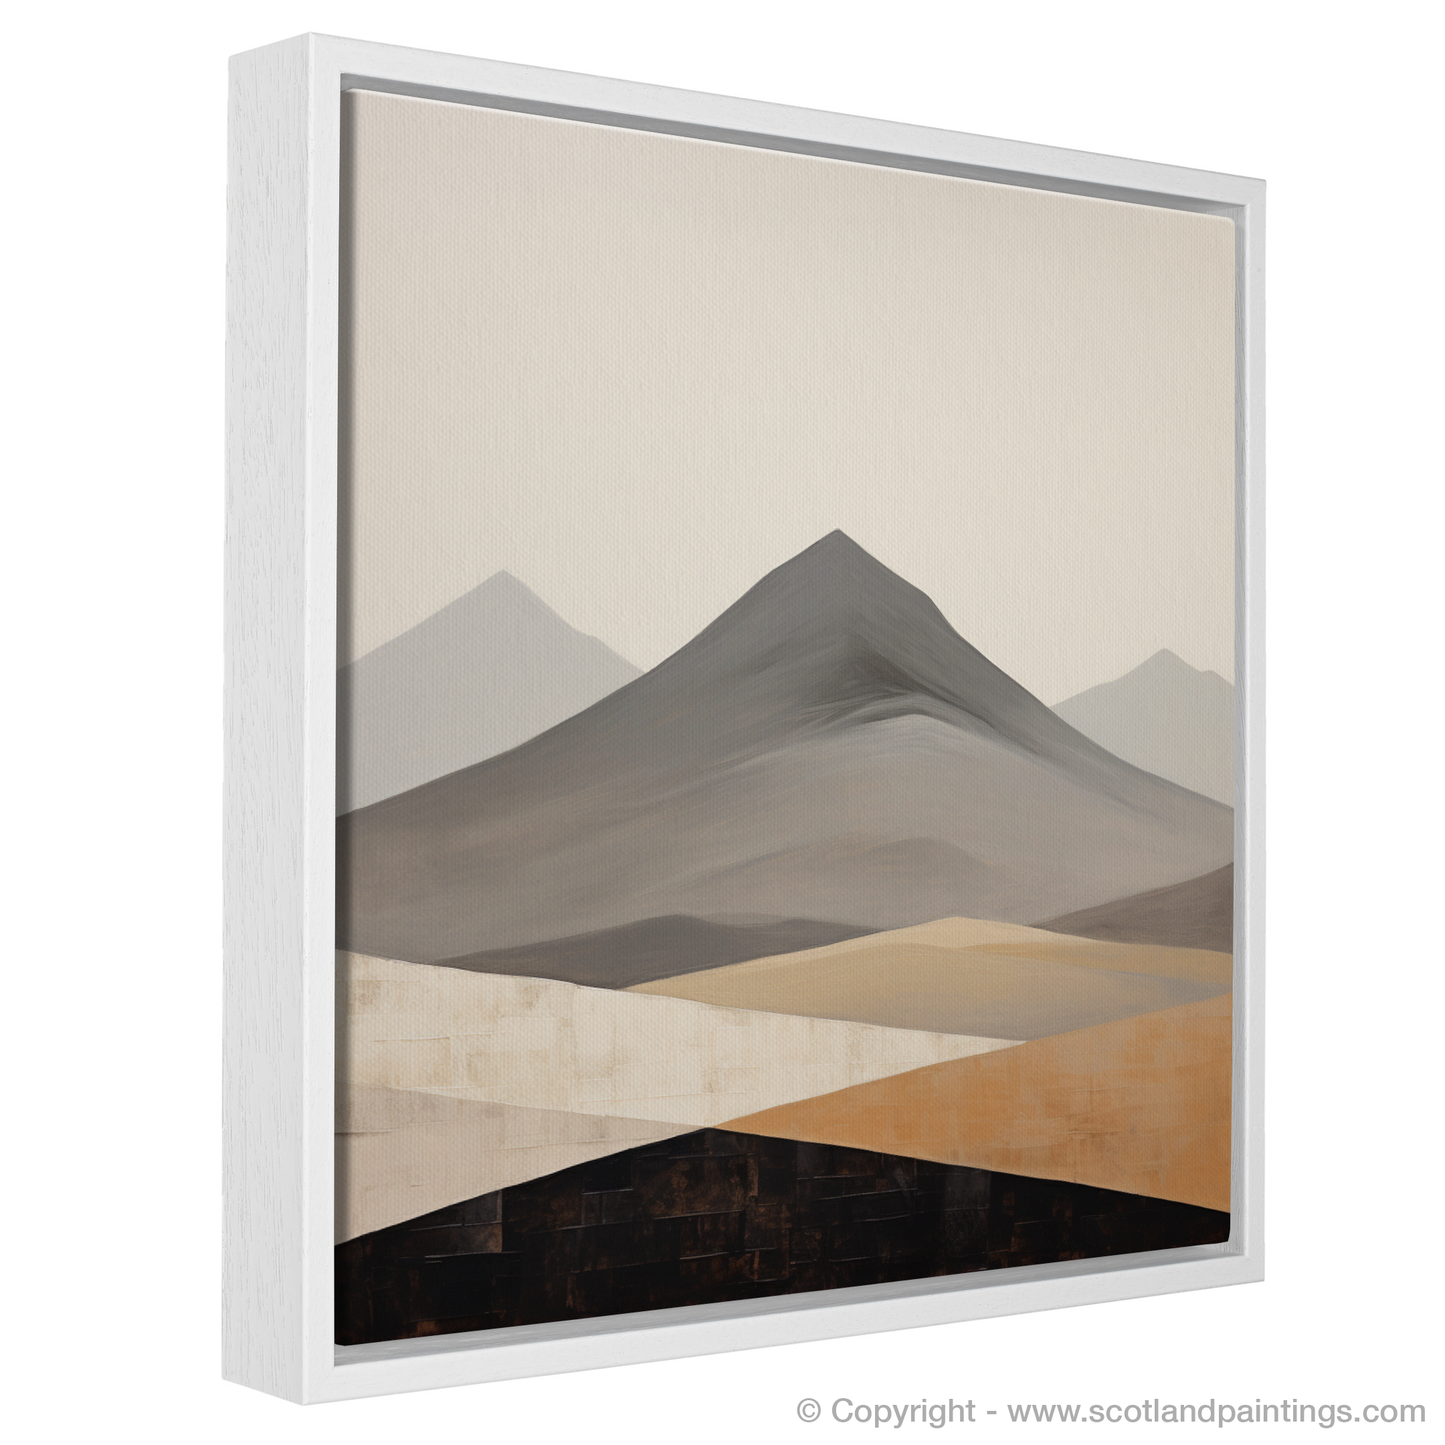 Painting and Art Print of Meall Garbh (Ben Lawers) entitled "Munro Essence: Meall Garbh Abstract".